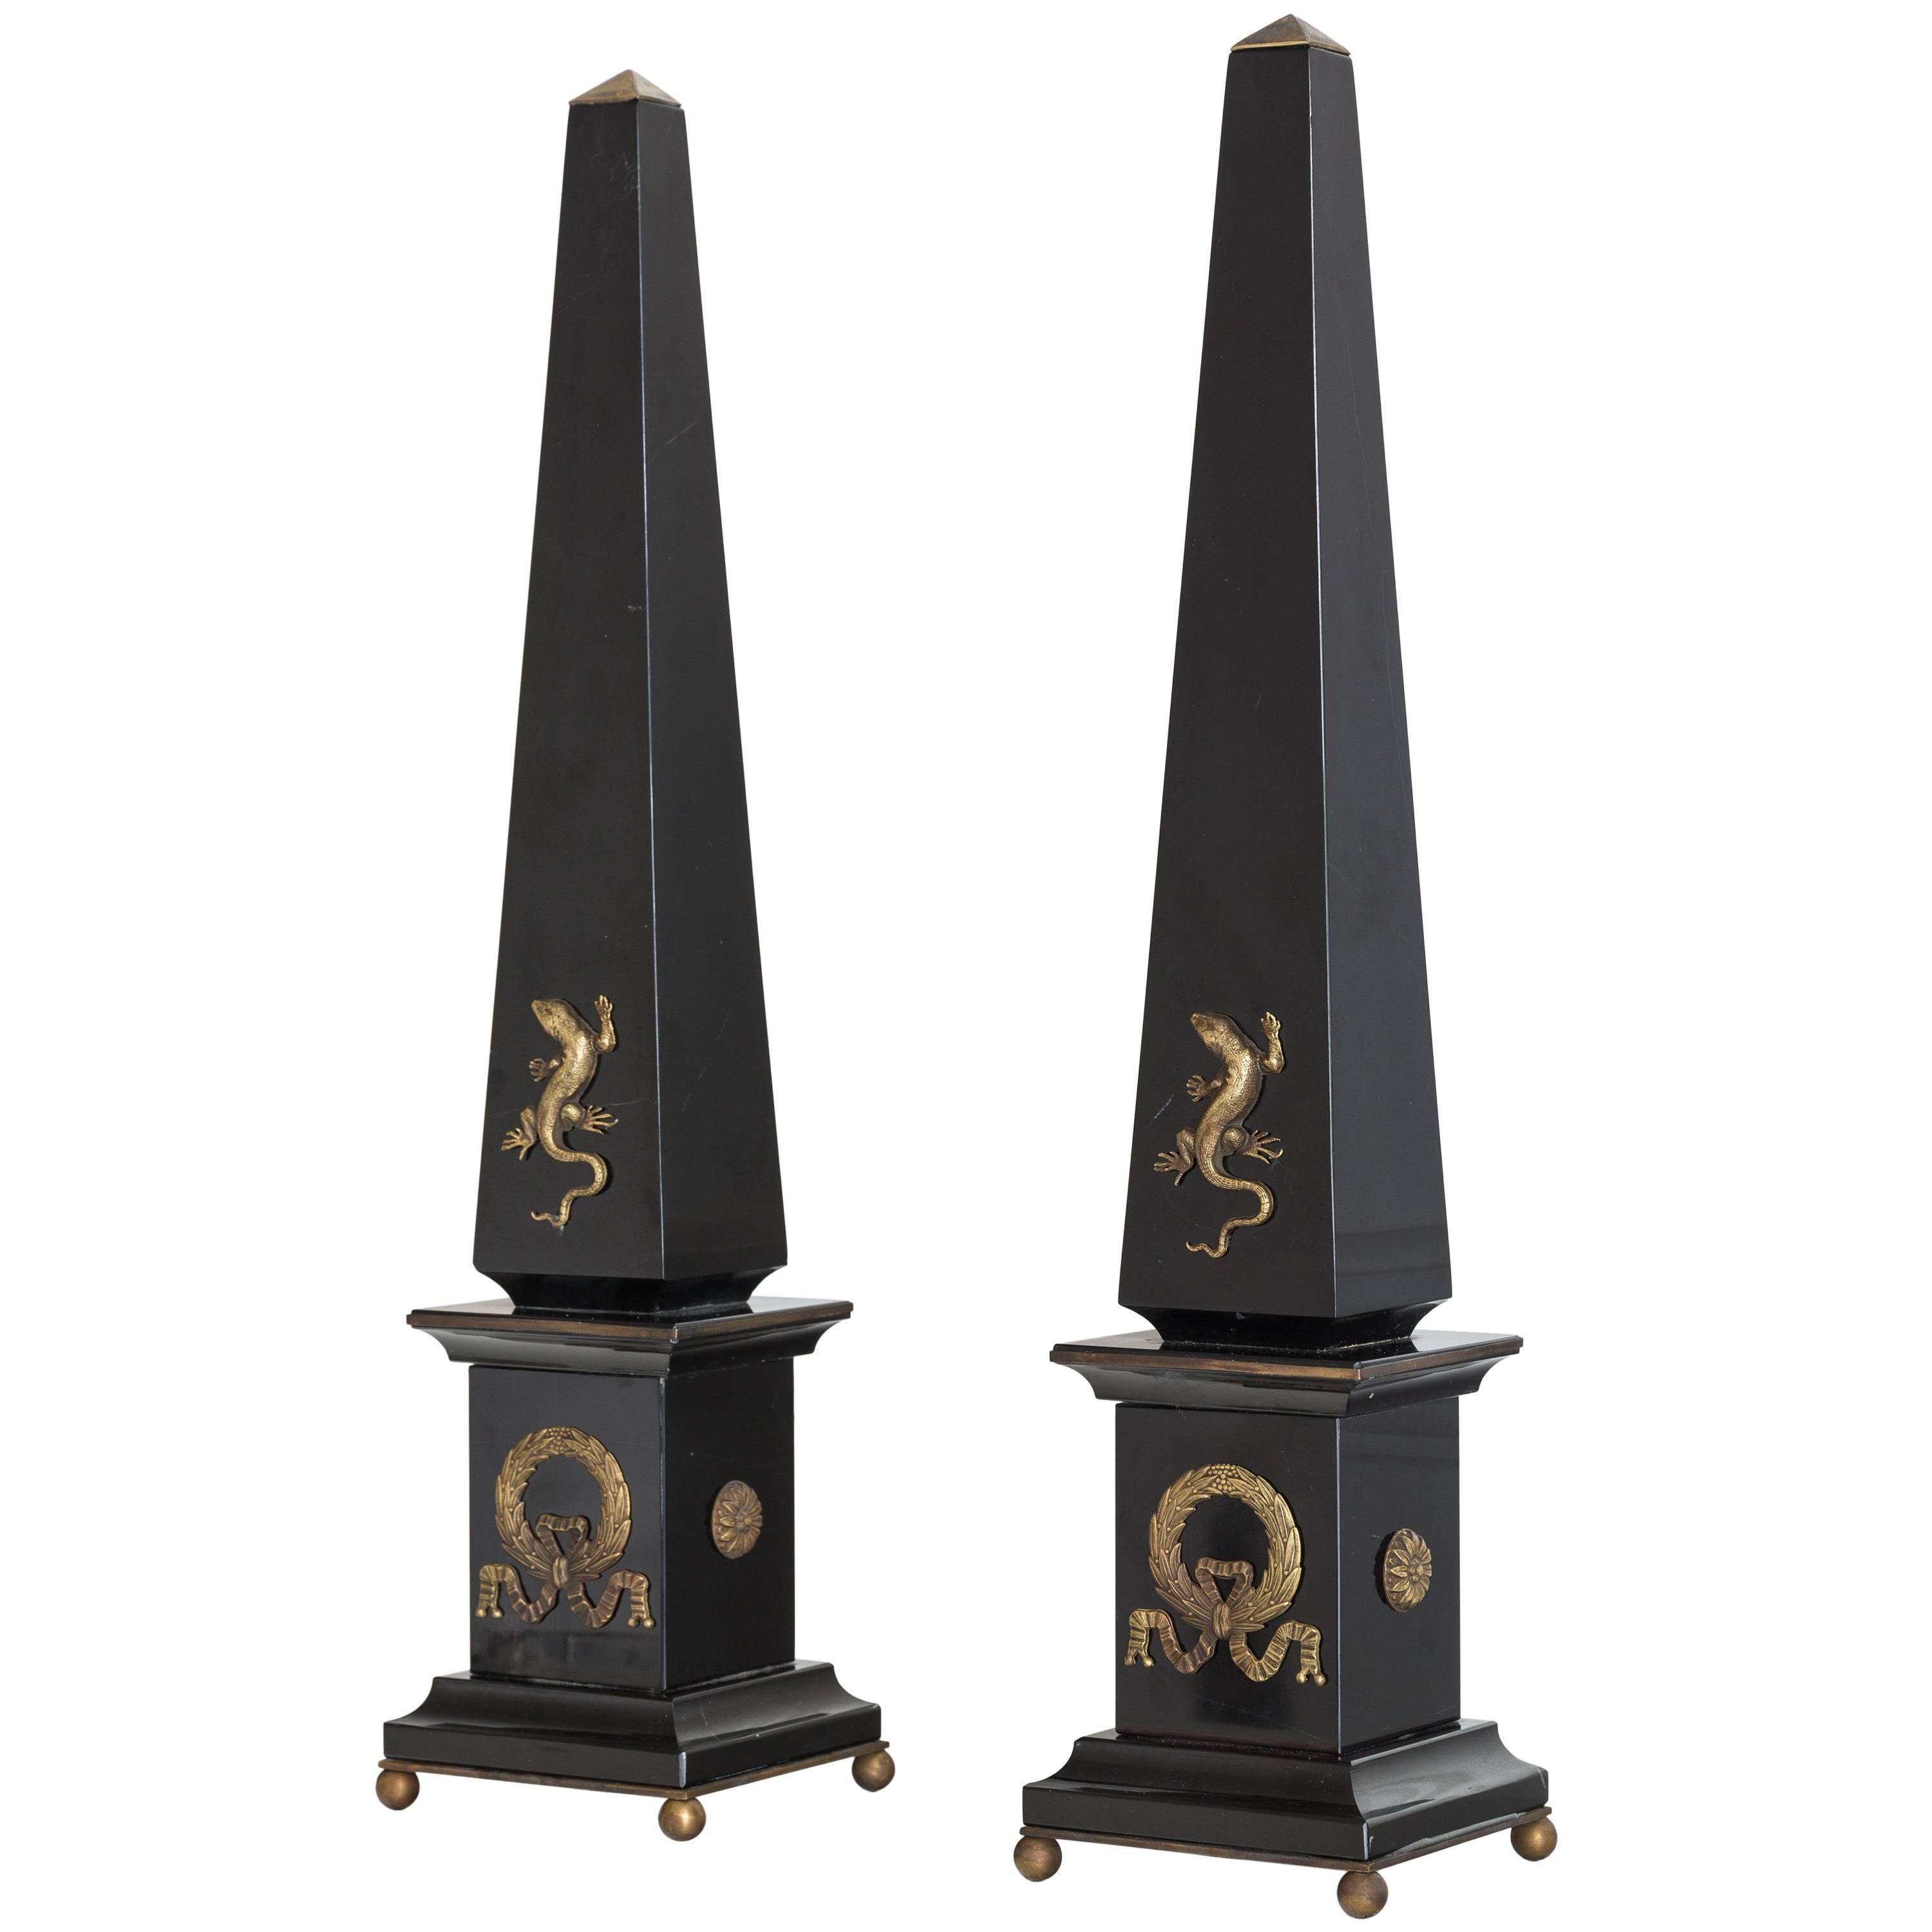 Pair of Black Marble and Bronze Obelisks "Gold Lizard", Limited Edition, 2017 